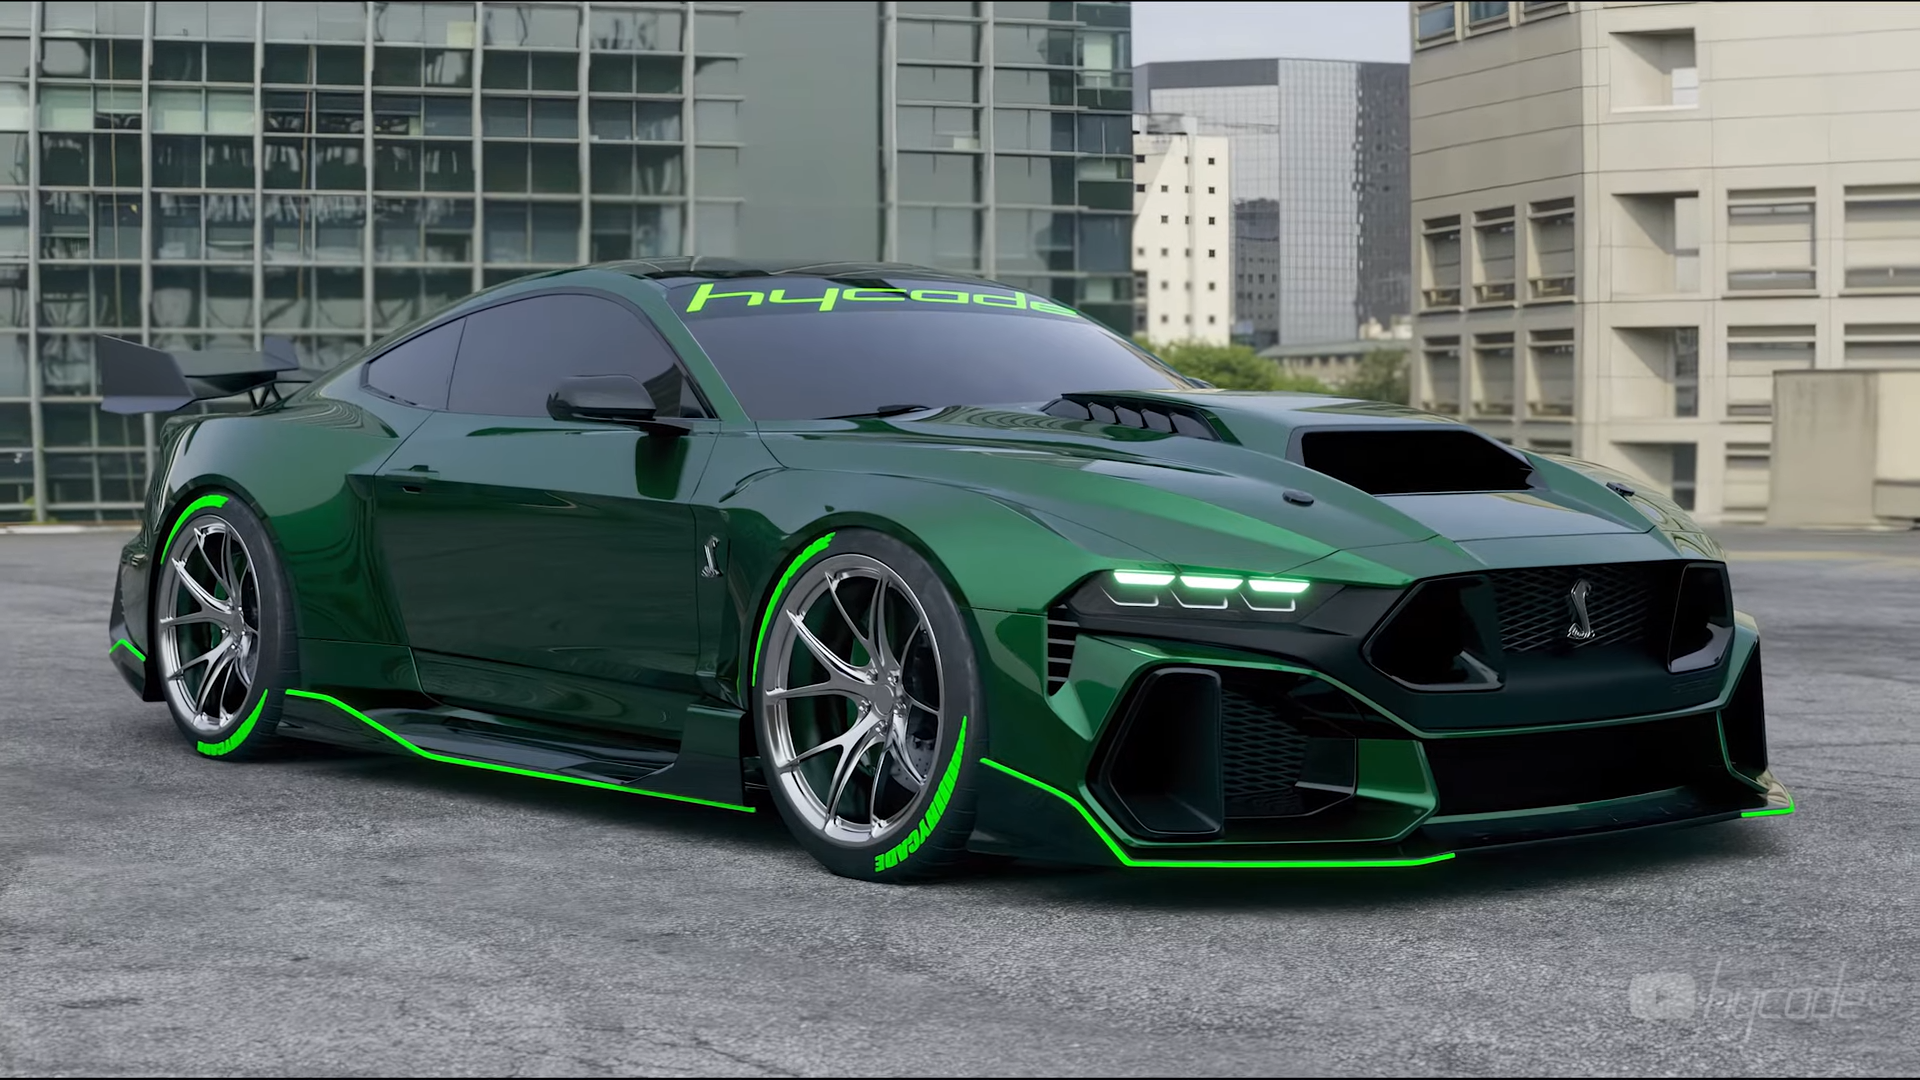 Ford Mustang GT 2024 Custom Body Kit by Hycade Buy with delivery